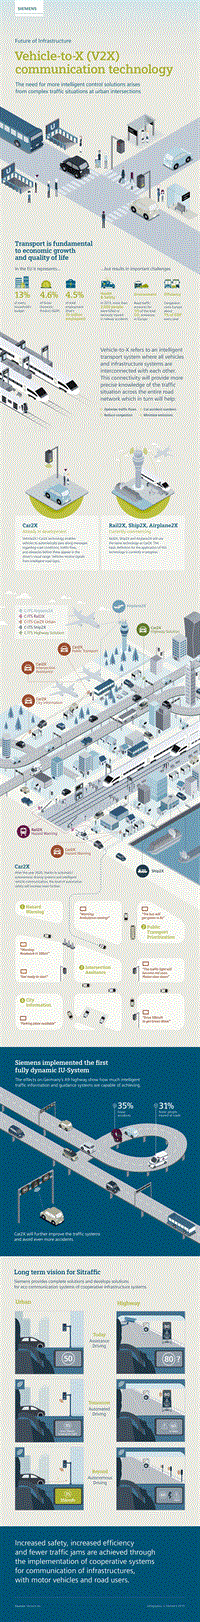 siemens-vehicle-to-x-communication-technology-infographic